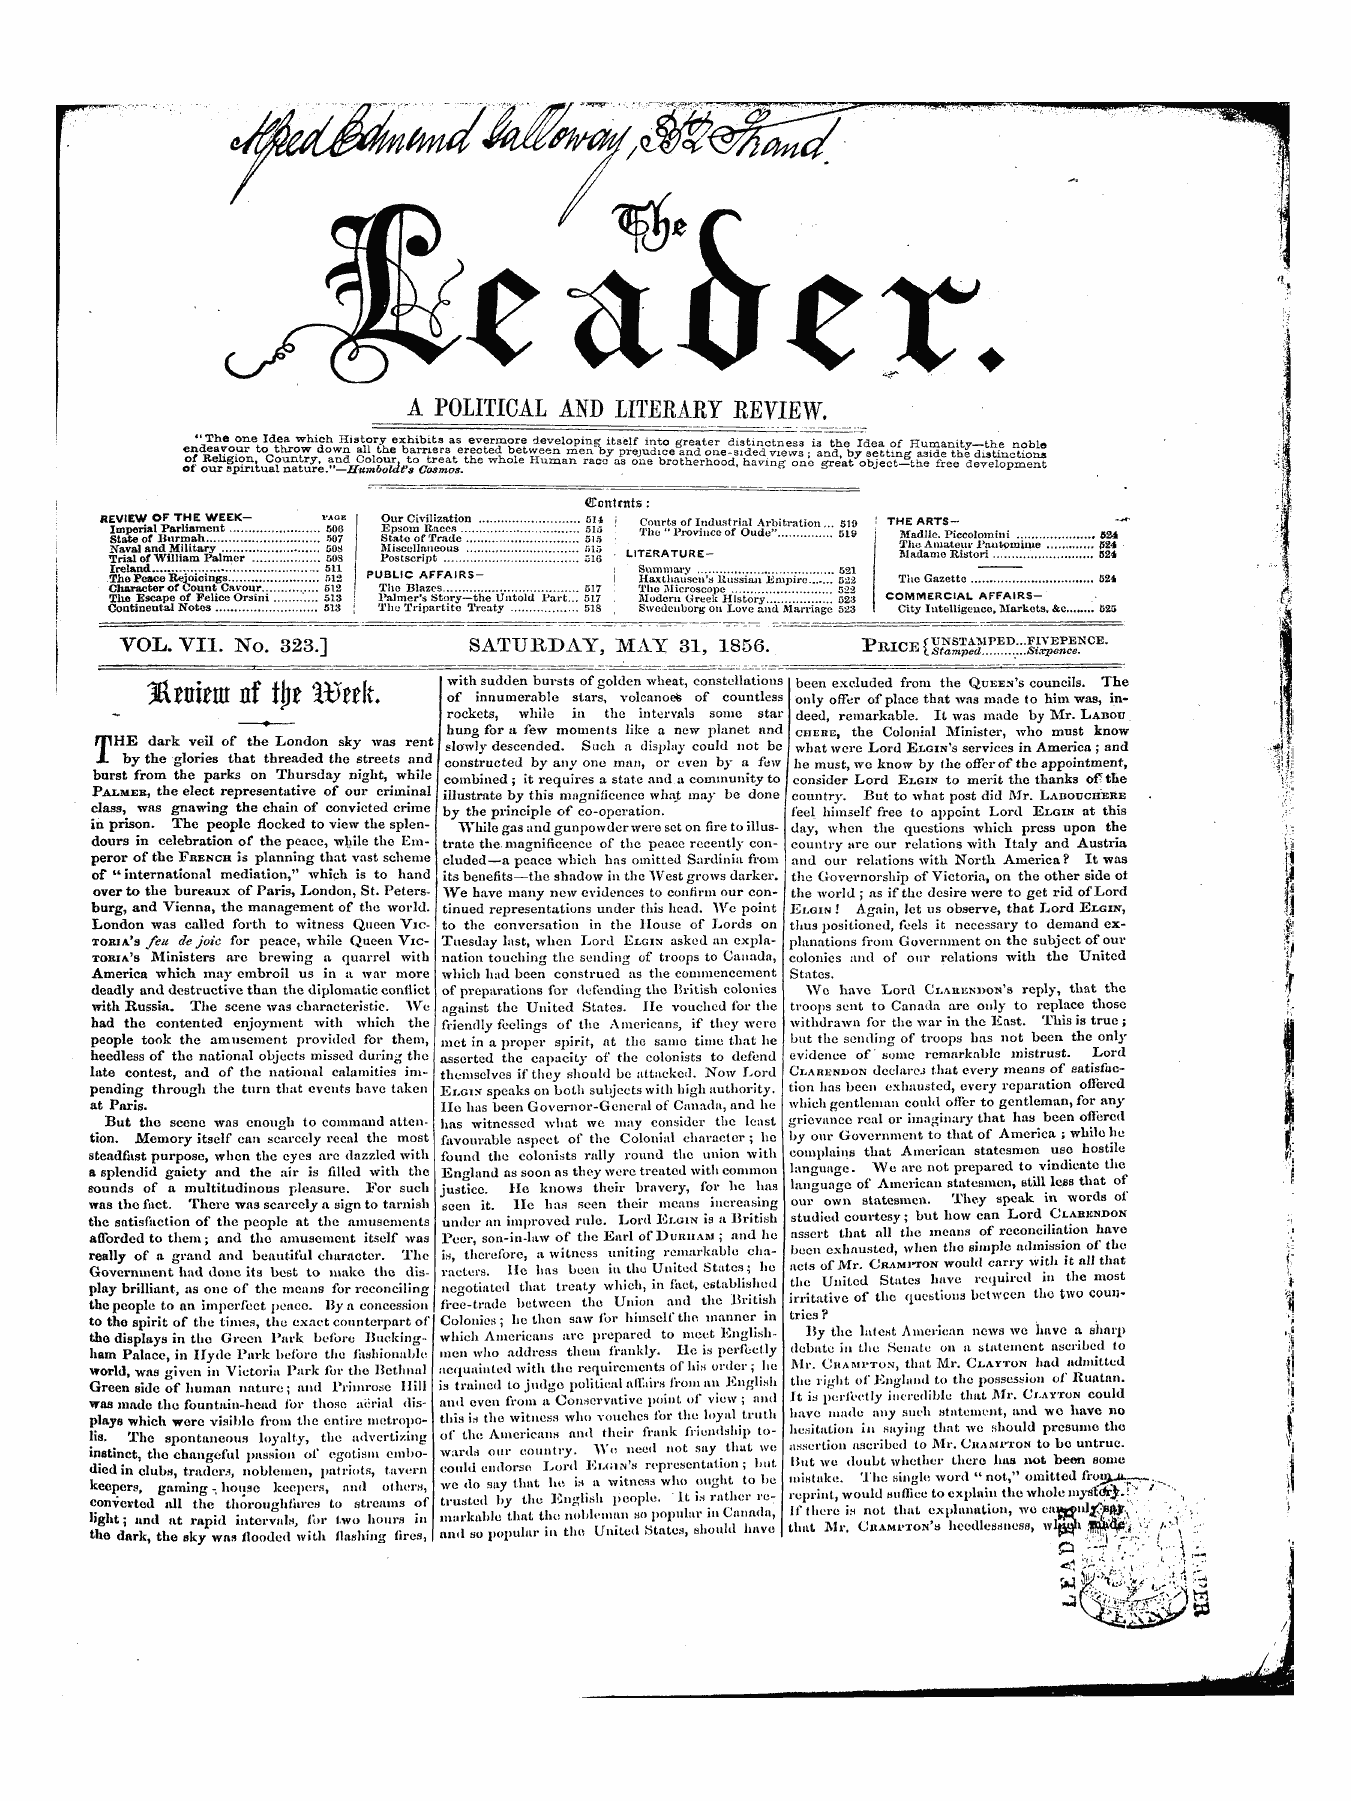 Leader (1850-1860): jS F Y, 1st edition - I Contents: